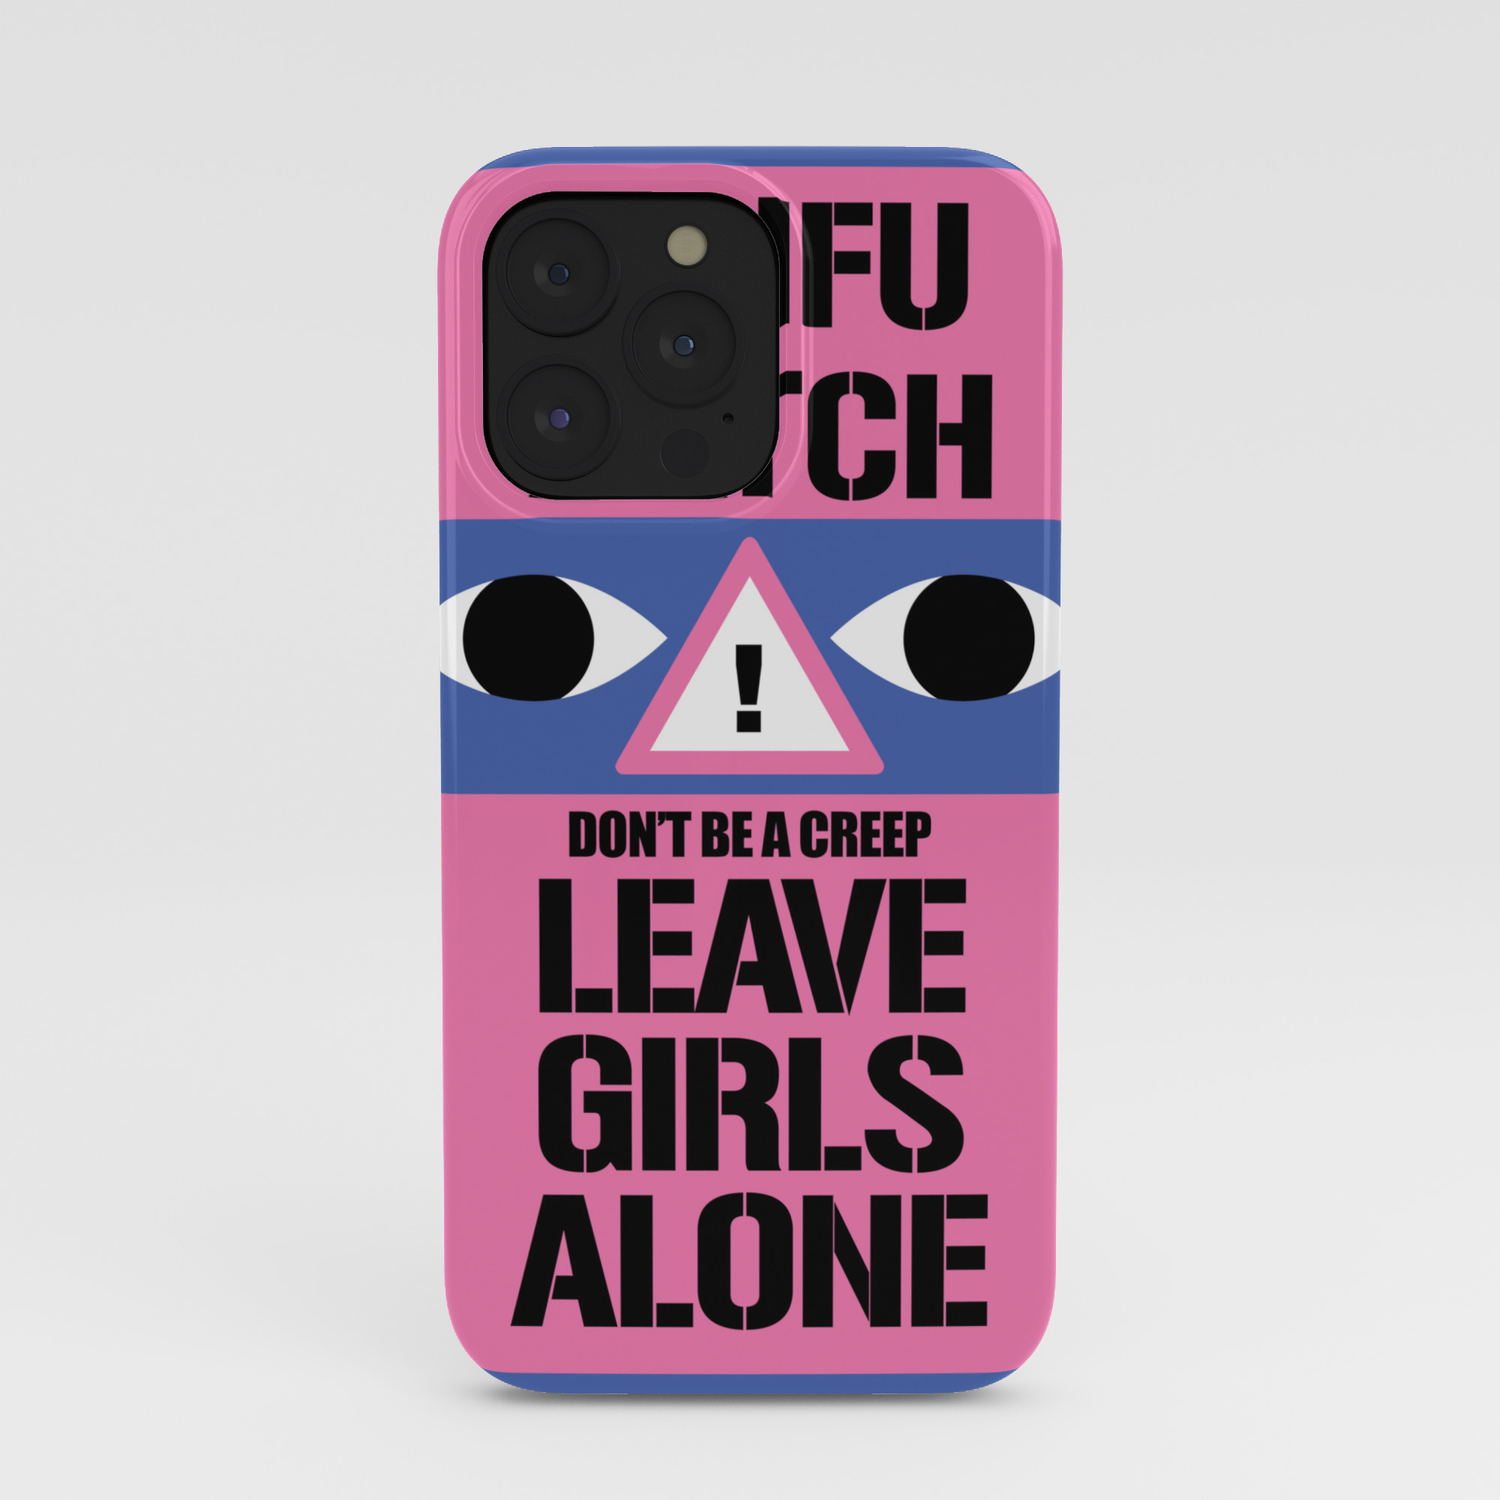 Convention WAIFU WATCH - LEAVE GIRLS ALONE don't a creep [pastel] iPhone Case Rainy Studios | Society6